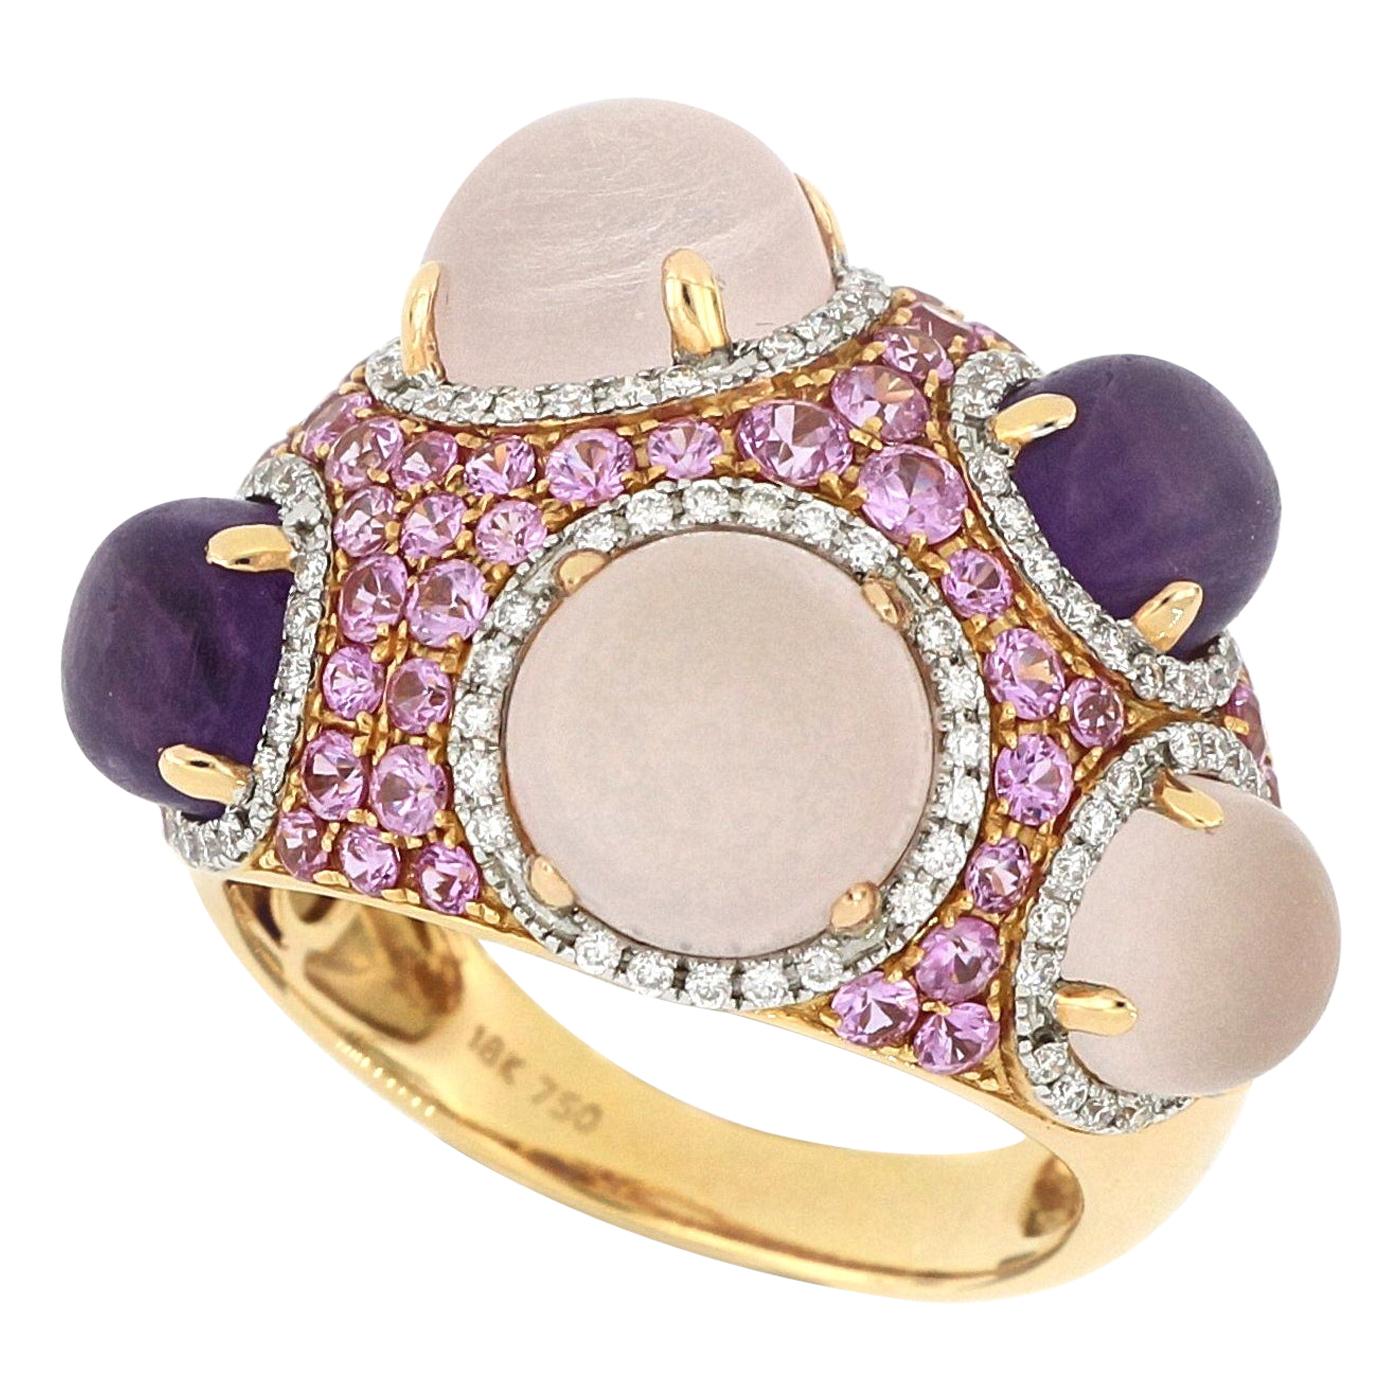 18 Karat Gold Cocktail Ring with Amethyst, Pink Sapphire, Quartz and Diamonds